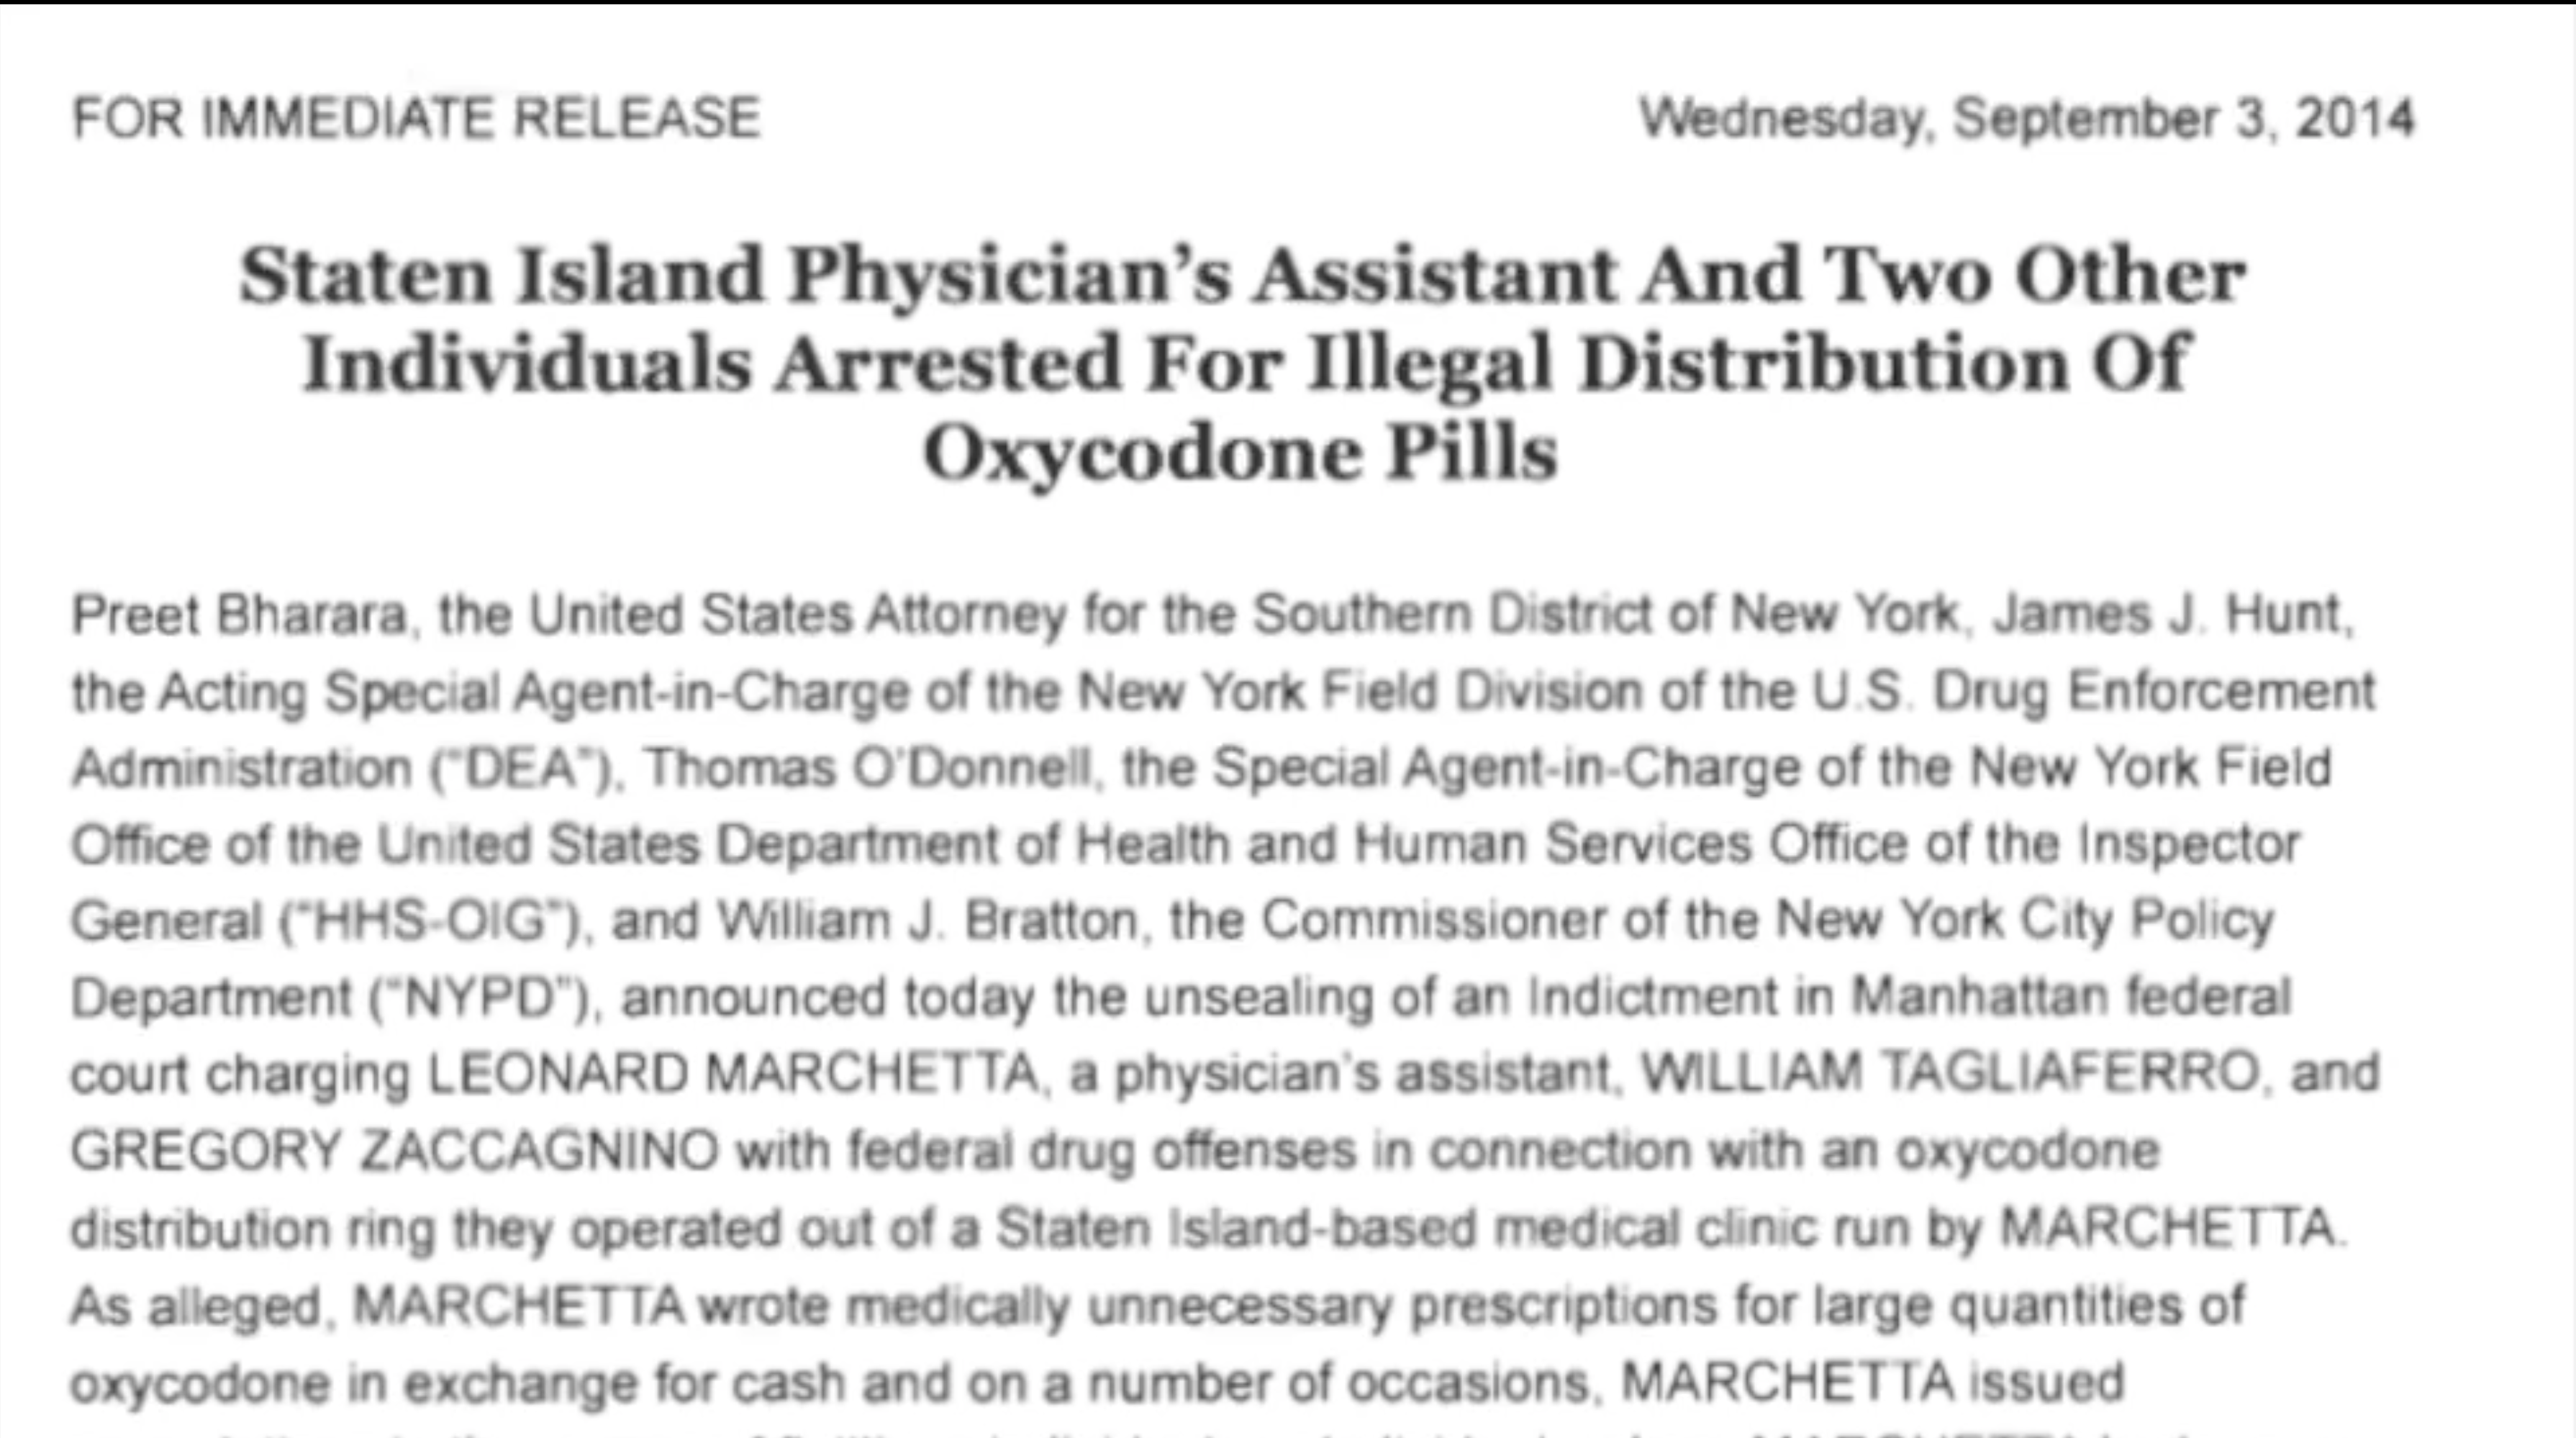 Staten Island Physician's assistant and two other individuals arrested for illegal distribution of oxycodone pills